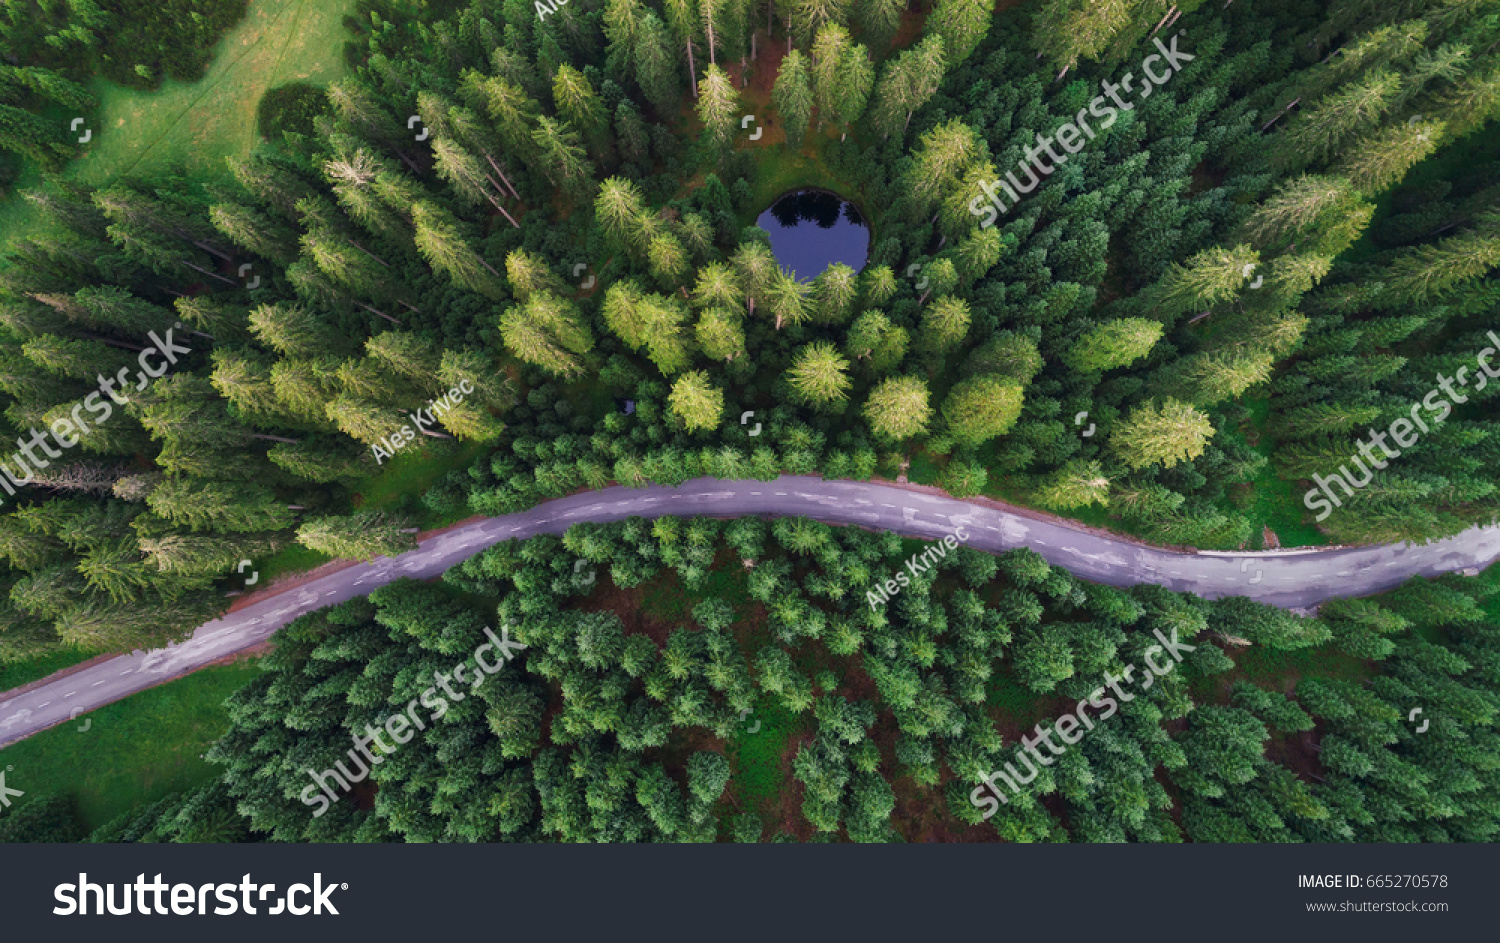 Aerial view of Pokljuka forest and meadows #665270578